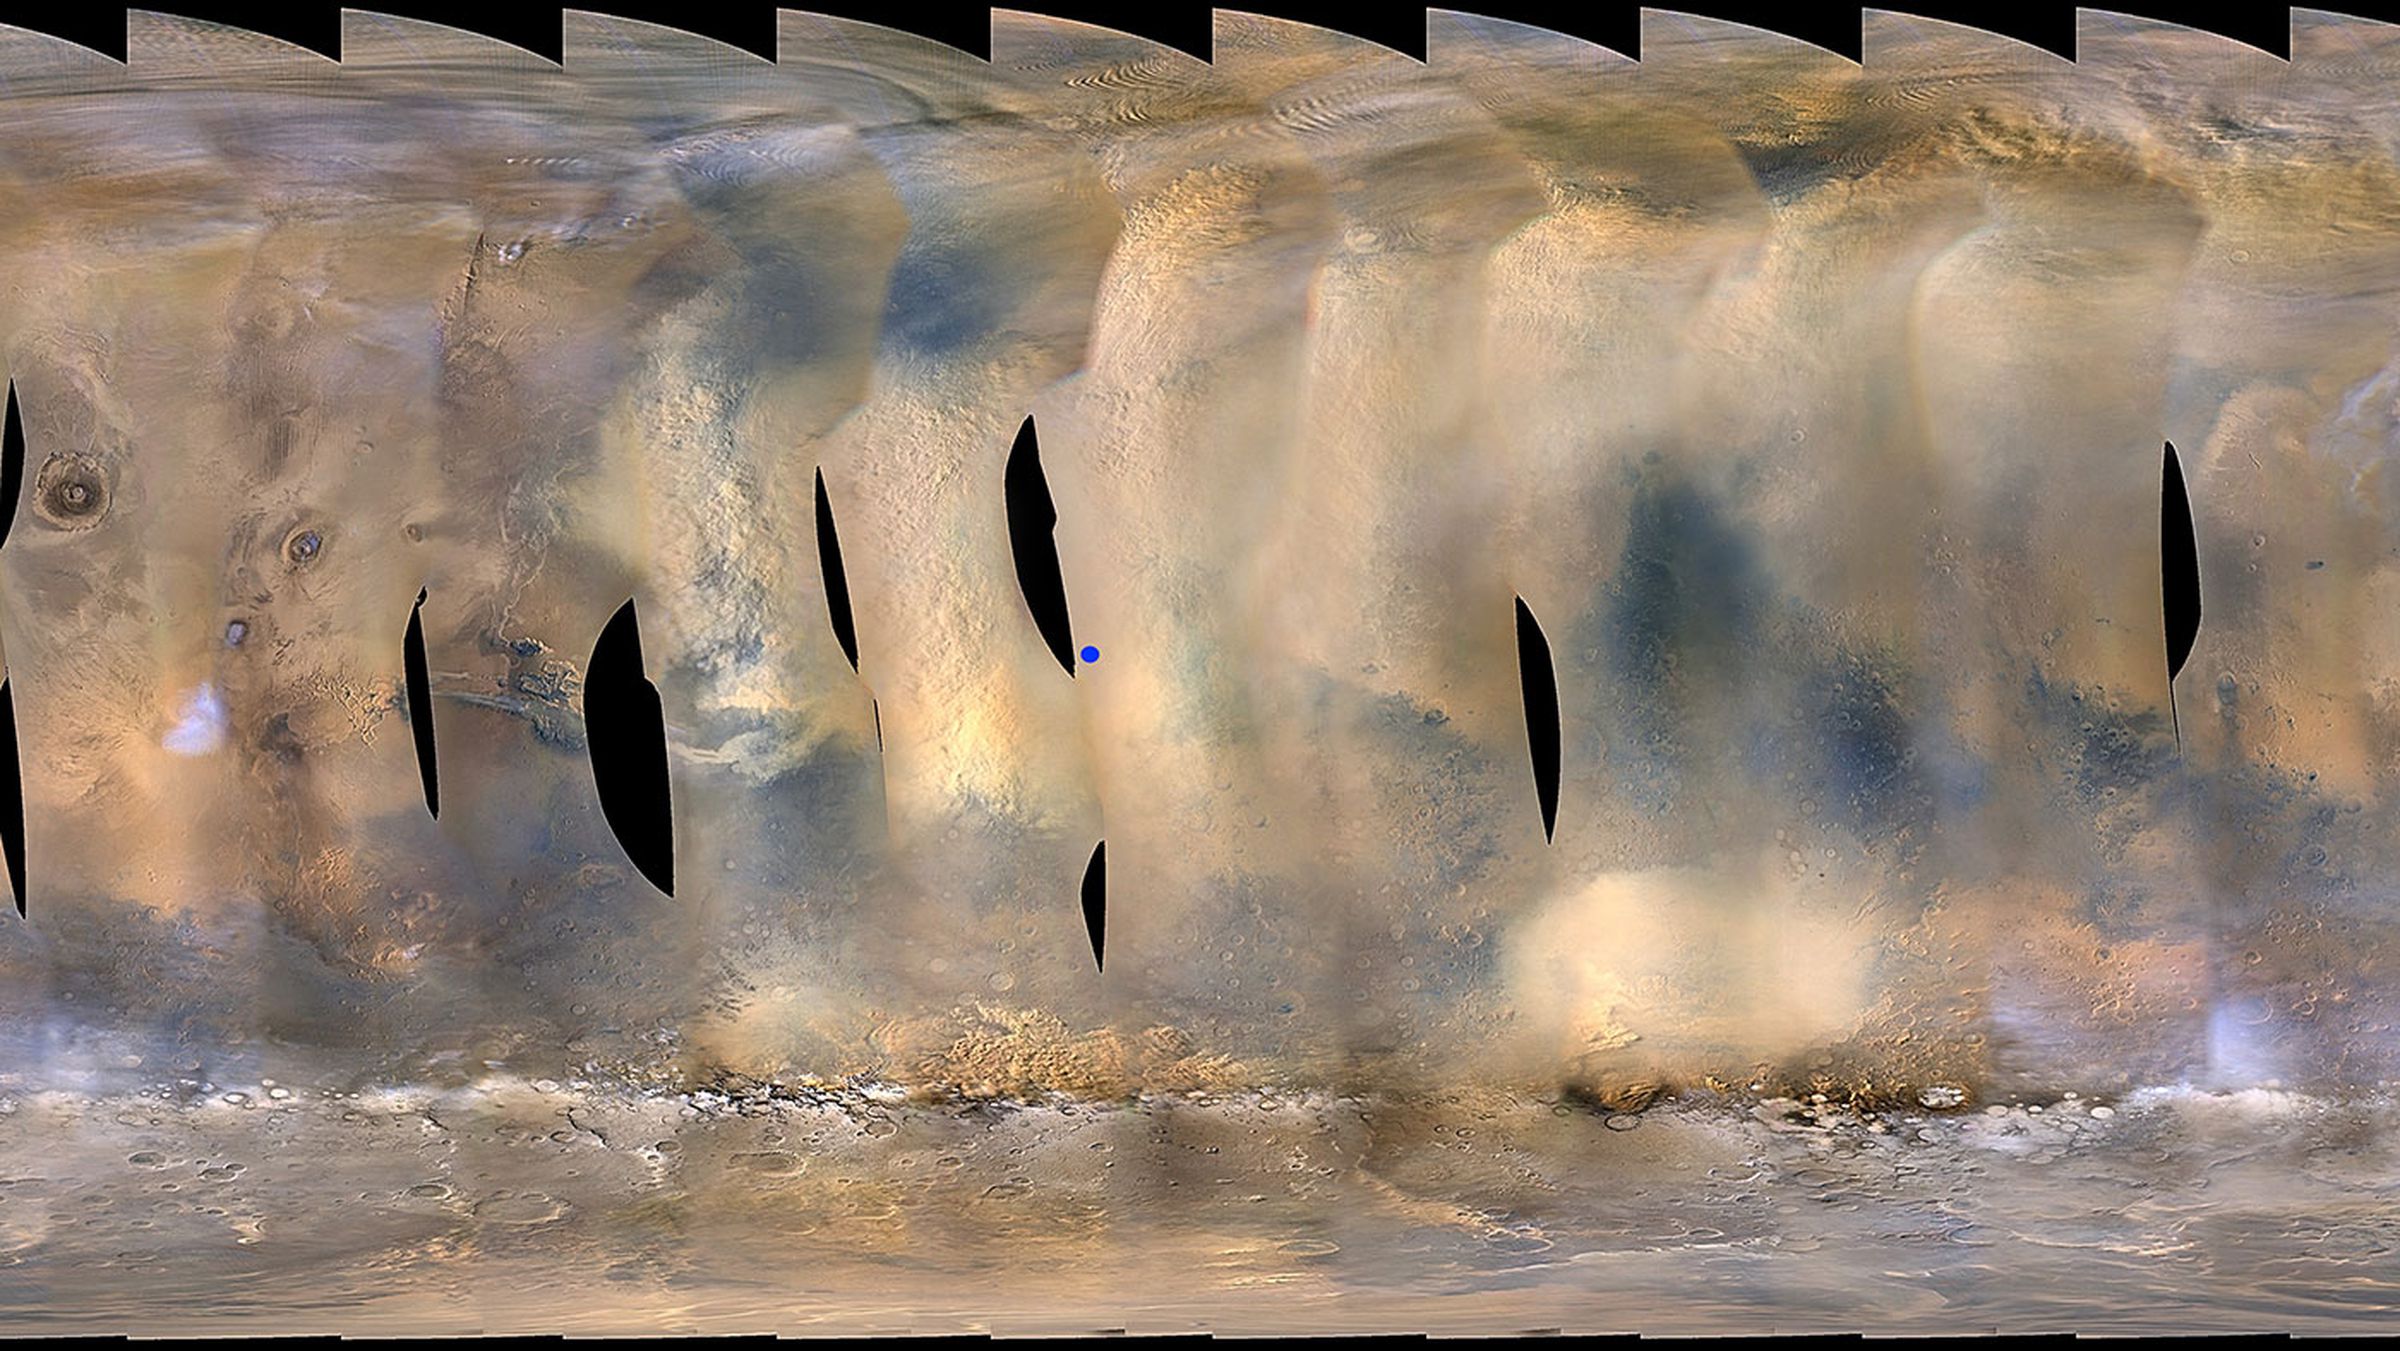 A map of the growing dust storm on Mars, taken on June 6th